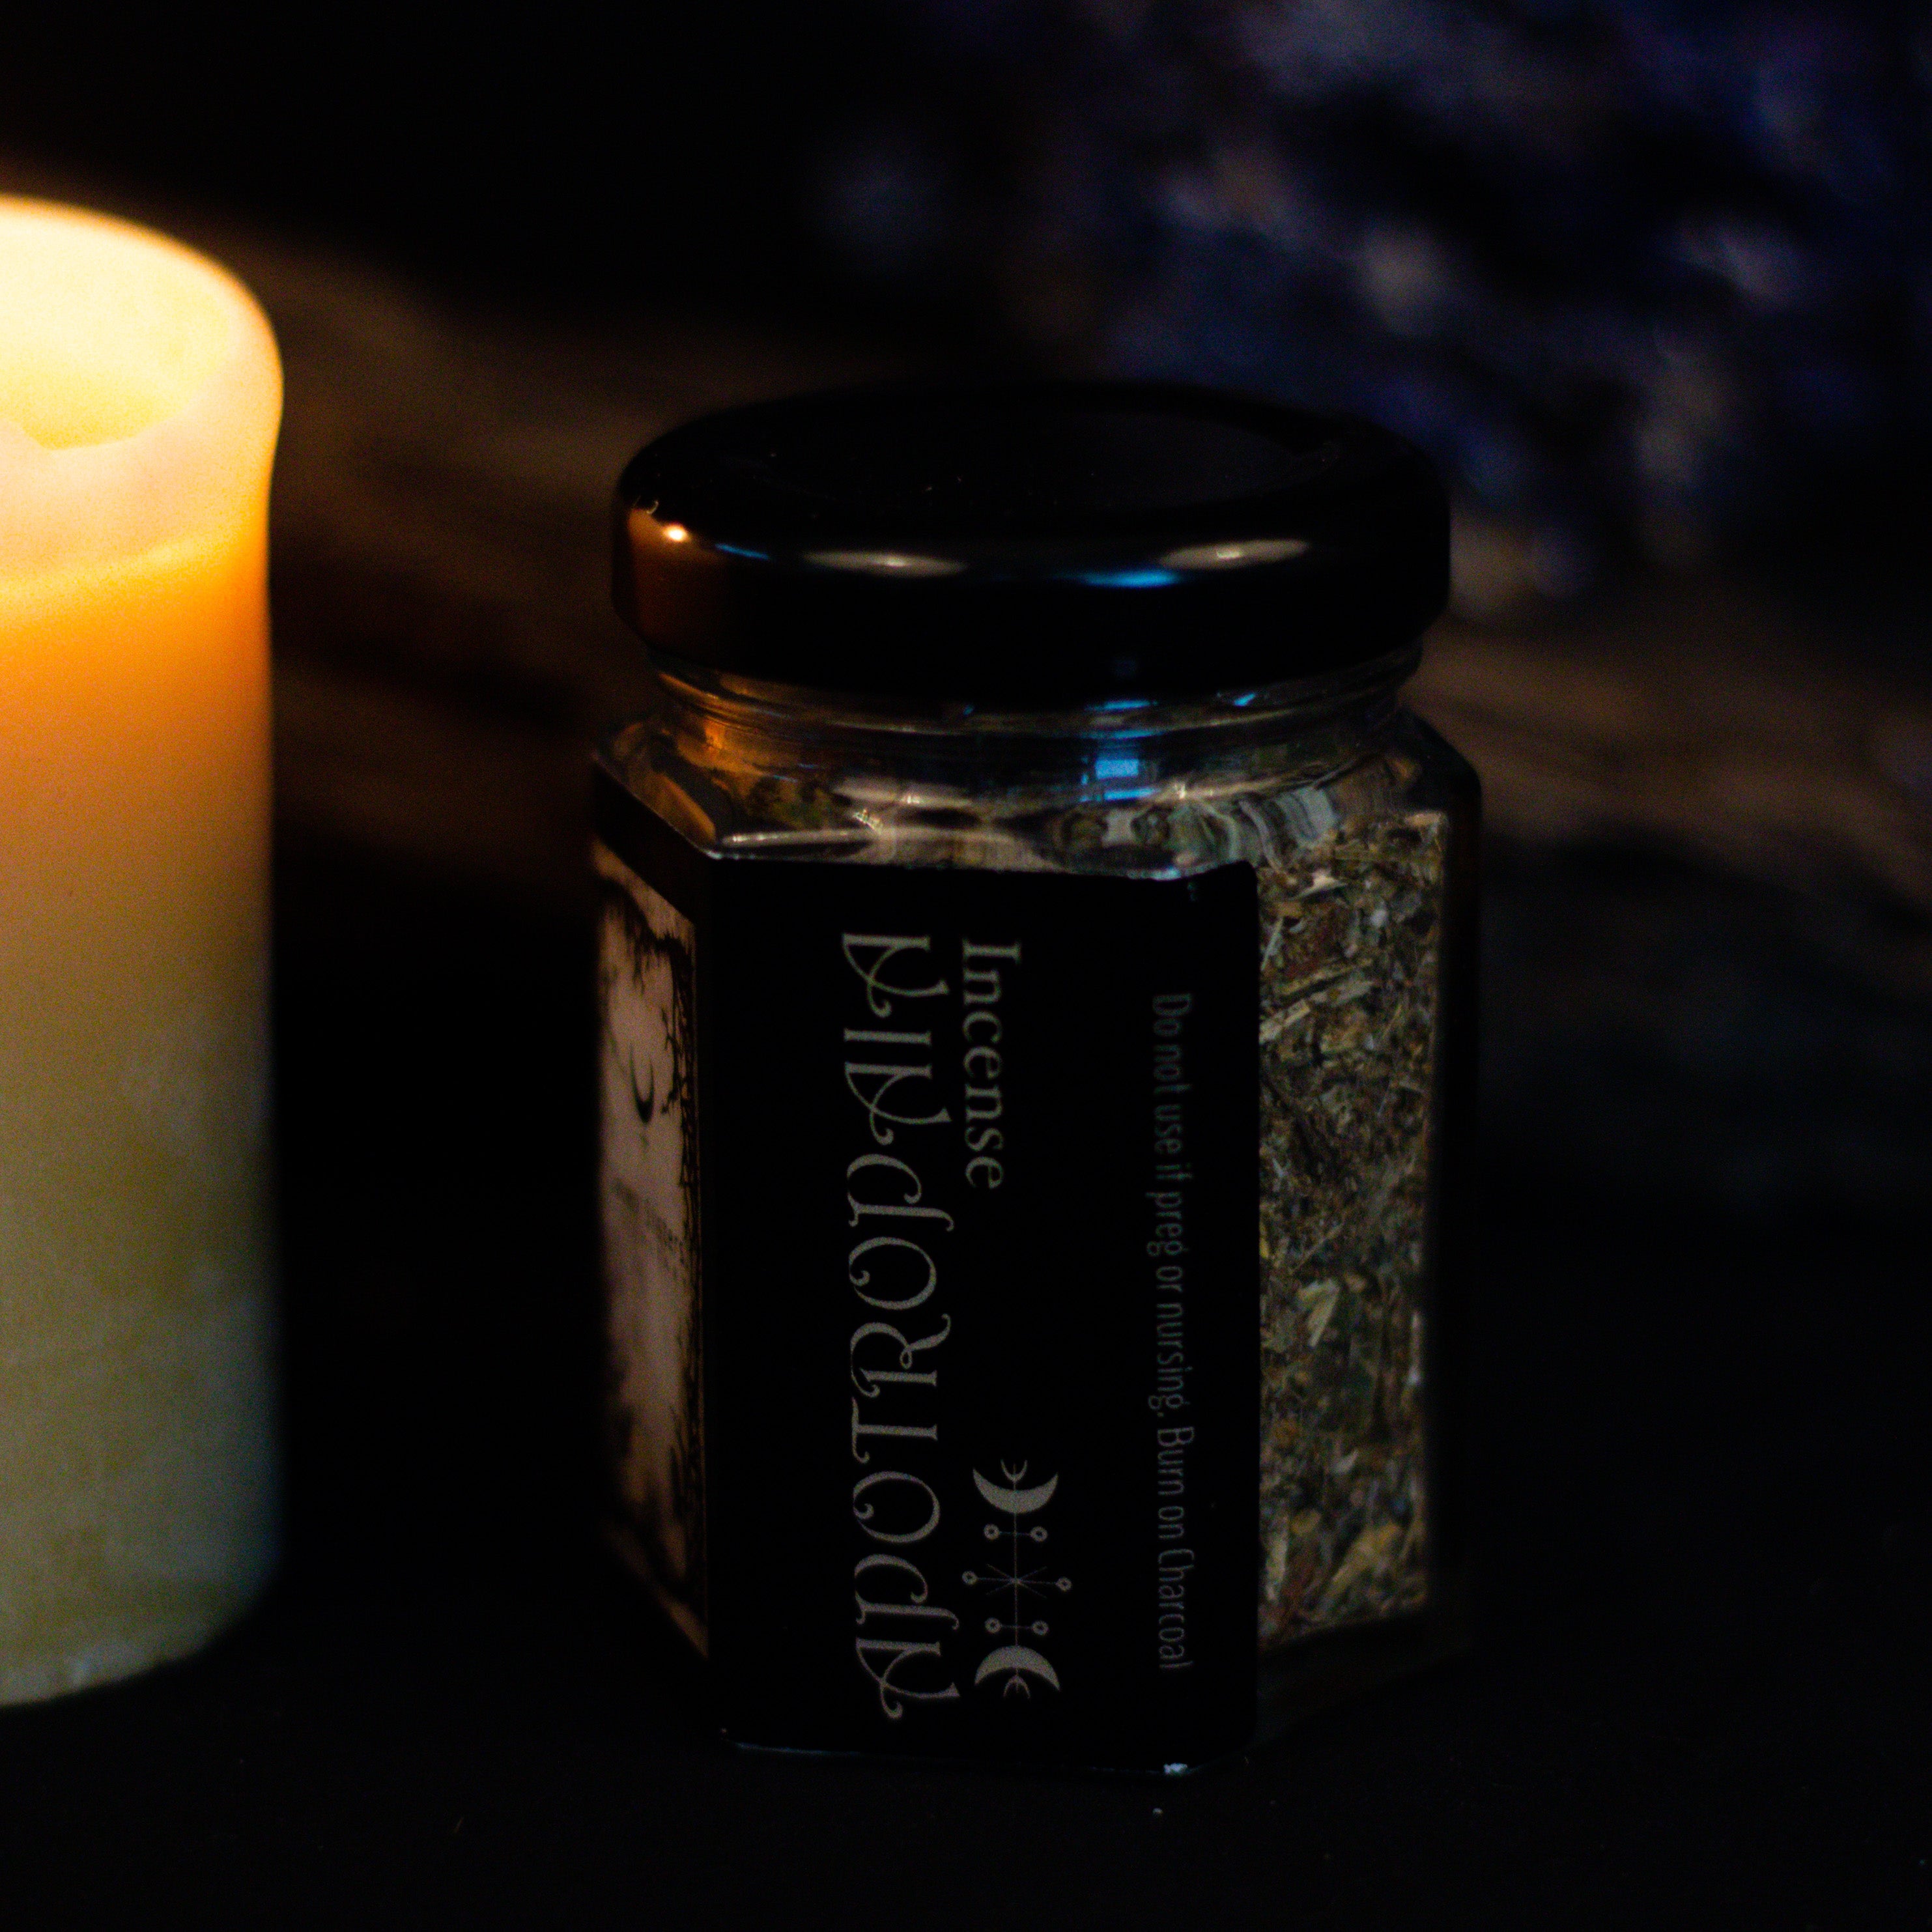 Hekate Warding and Protection | Incense